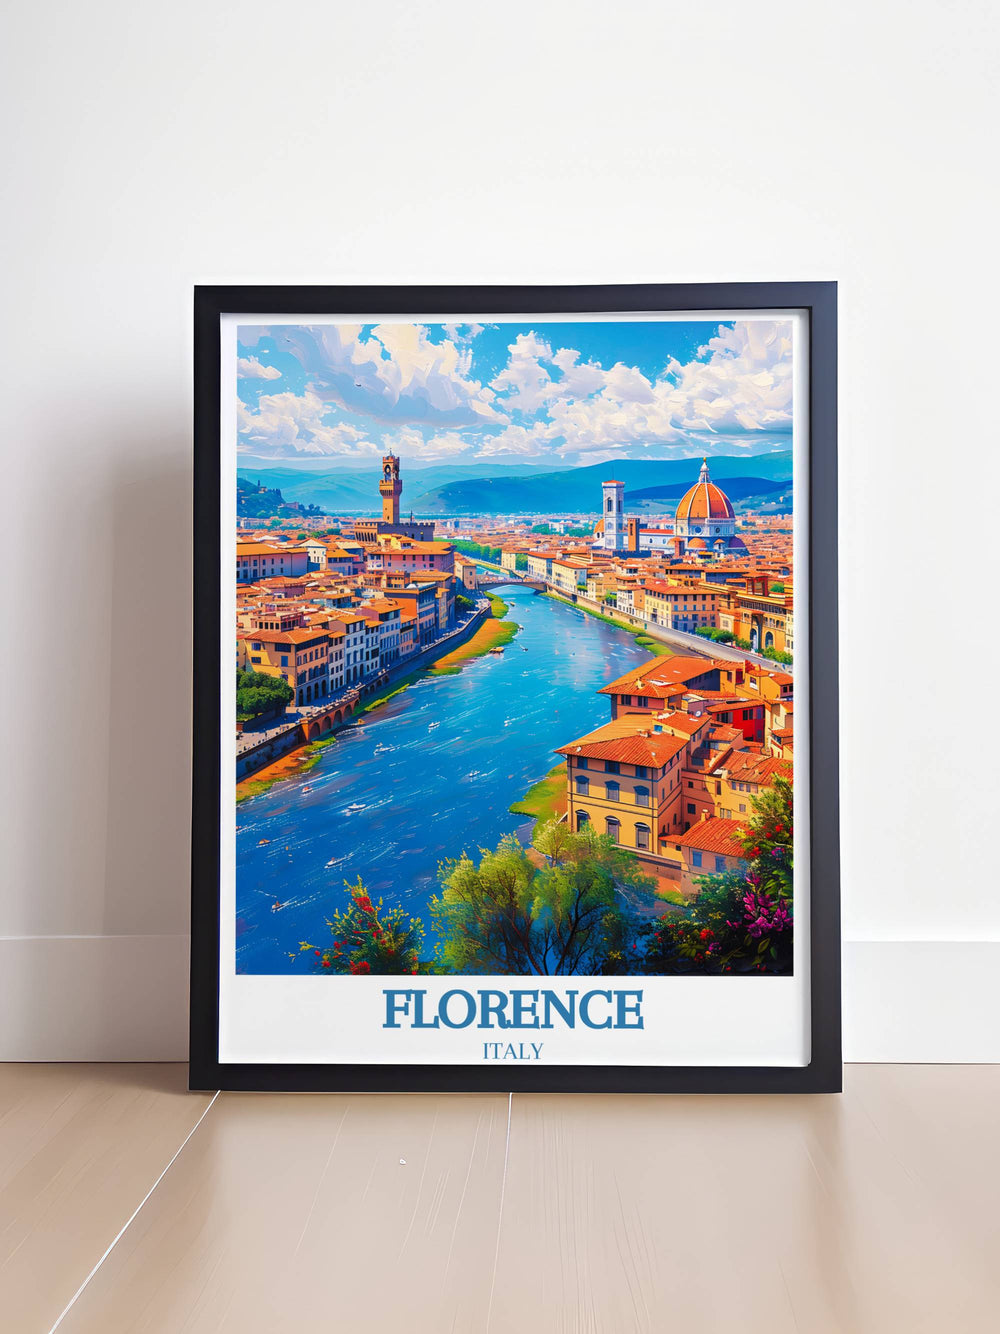 Uffizi Gallery inspired Home Wall Art, featuring iconic artworks and the storied corridors of Florence’s treasure trove of Renaissance art